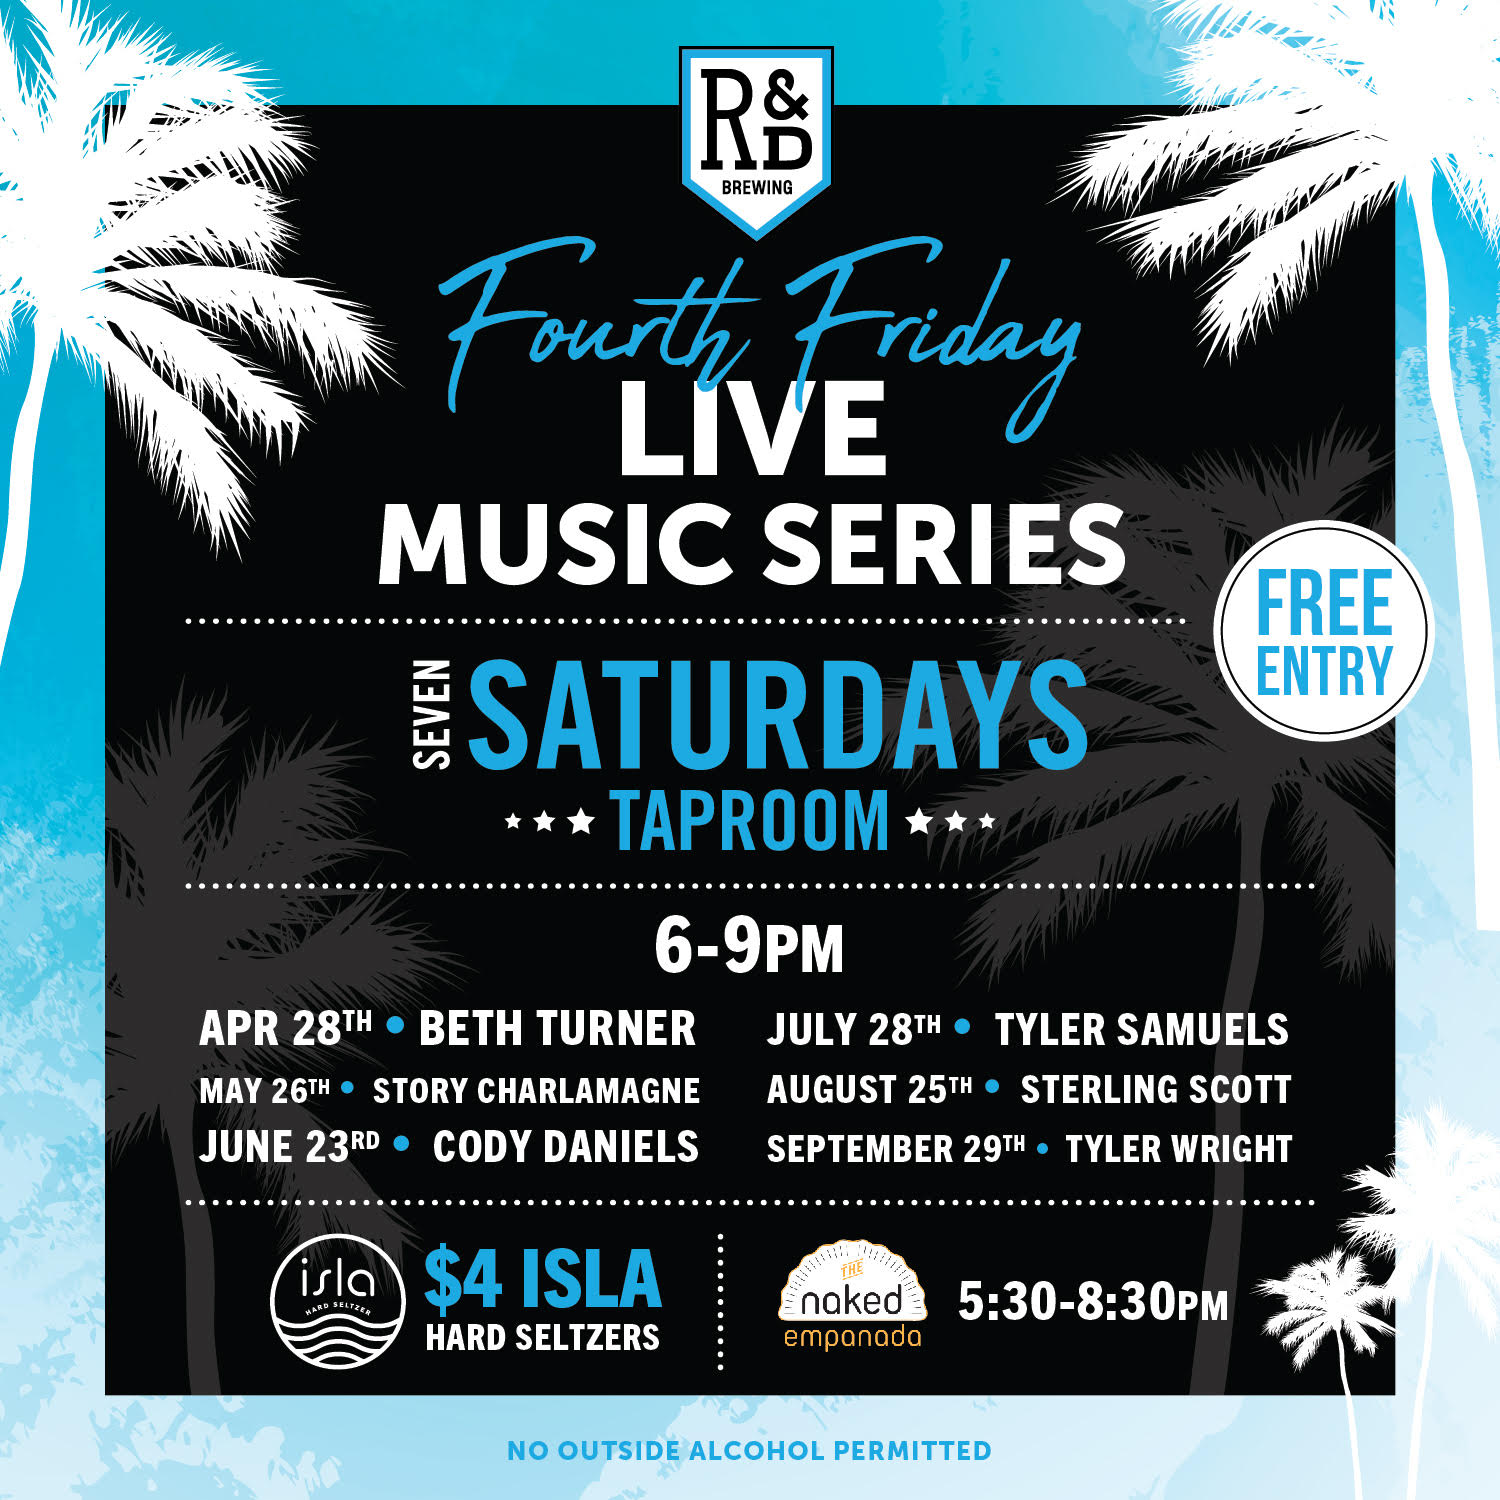 Fourth Friday Live Music Series